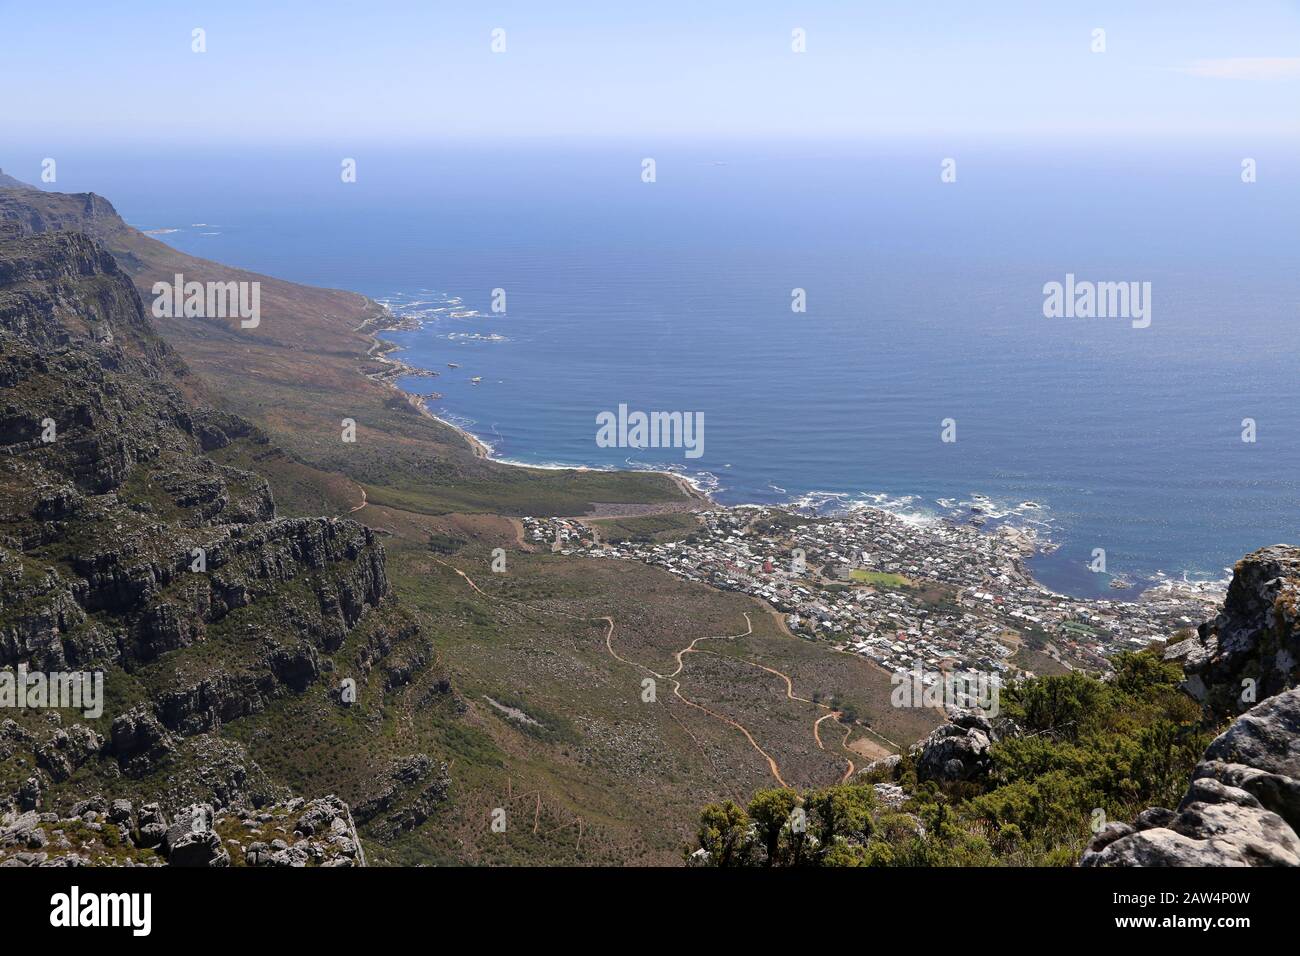 Camps Bay seen from Table Mountain, Table Mountain National Park, Cape Town, Table Bay, Western Cape Province, South Africa, Africa Stock Photo